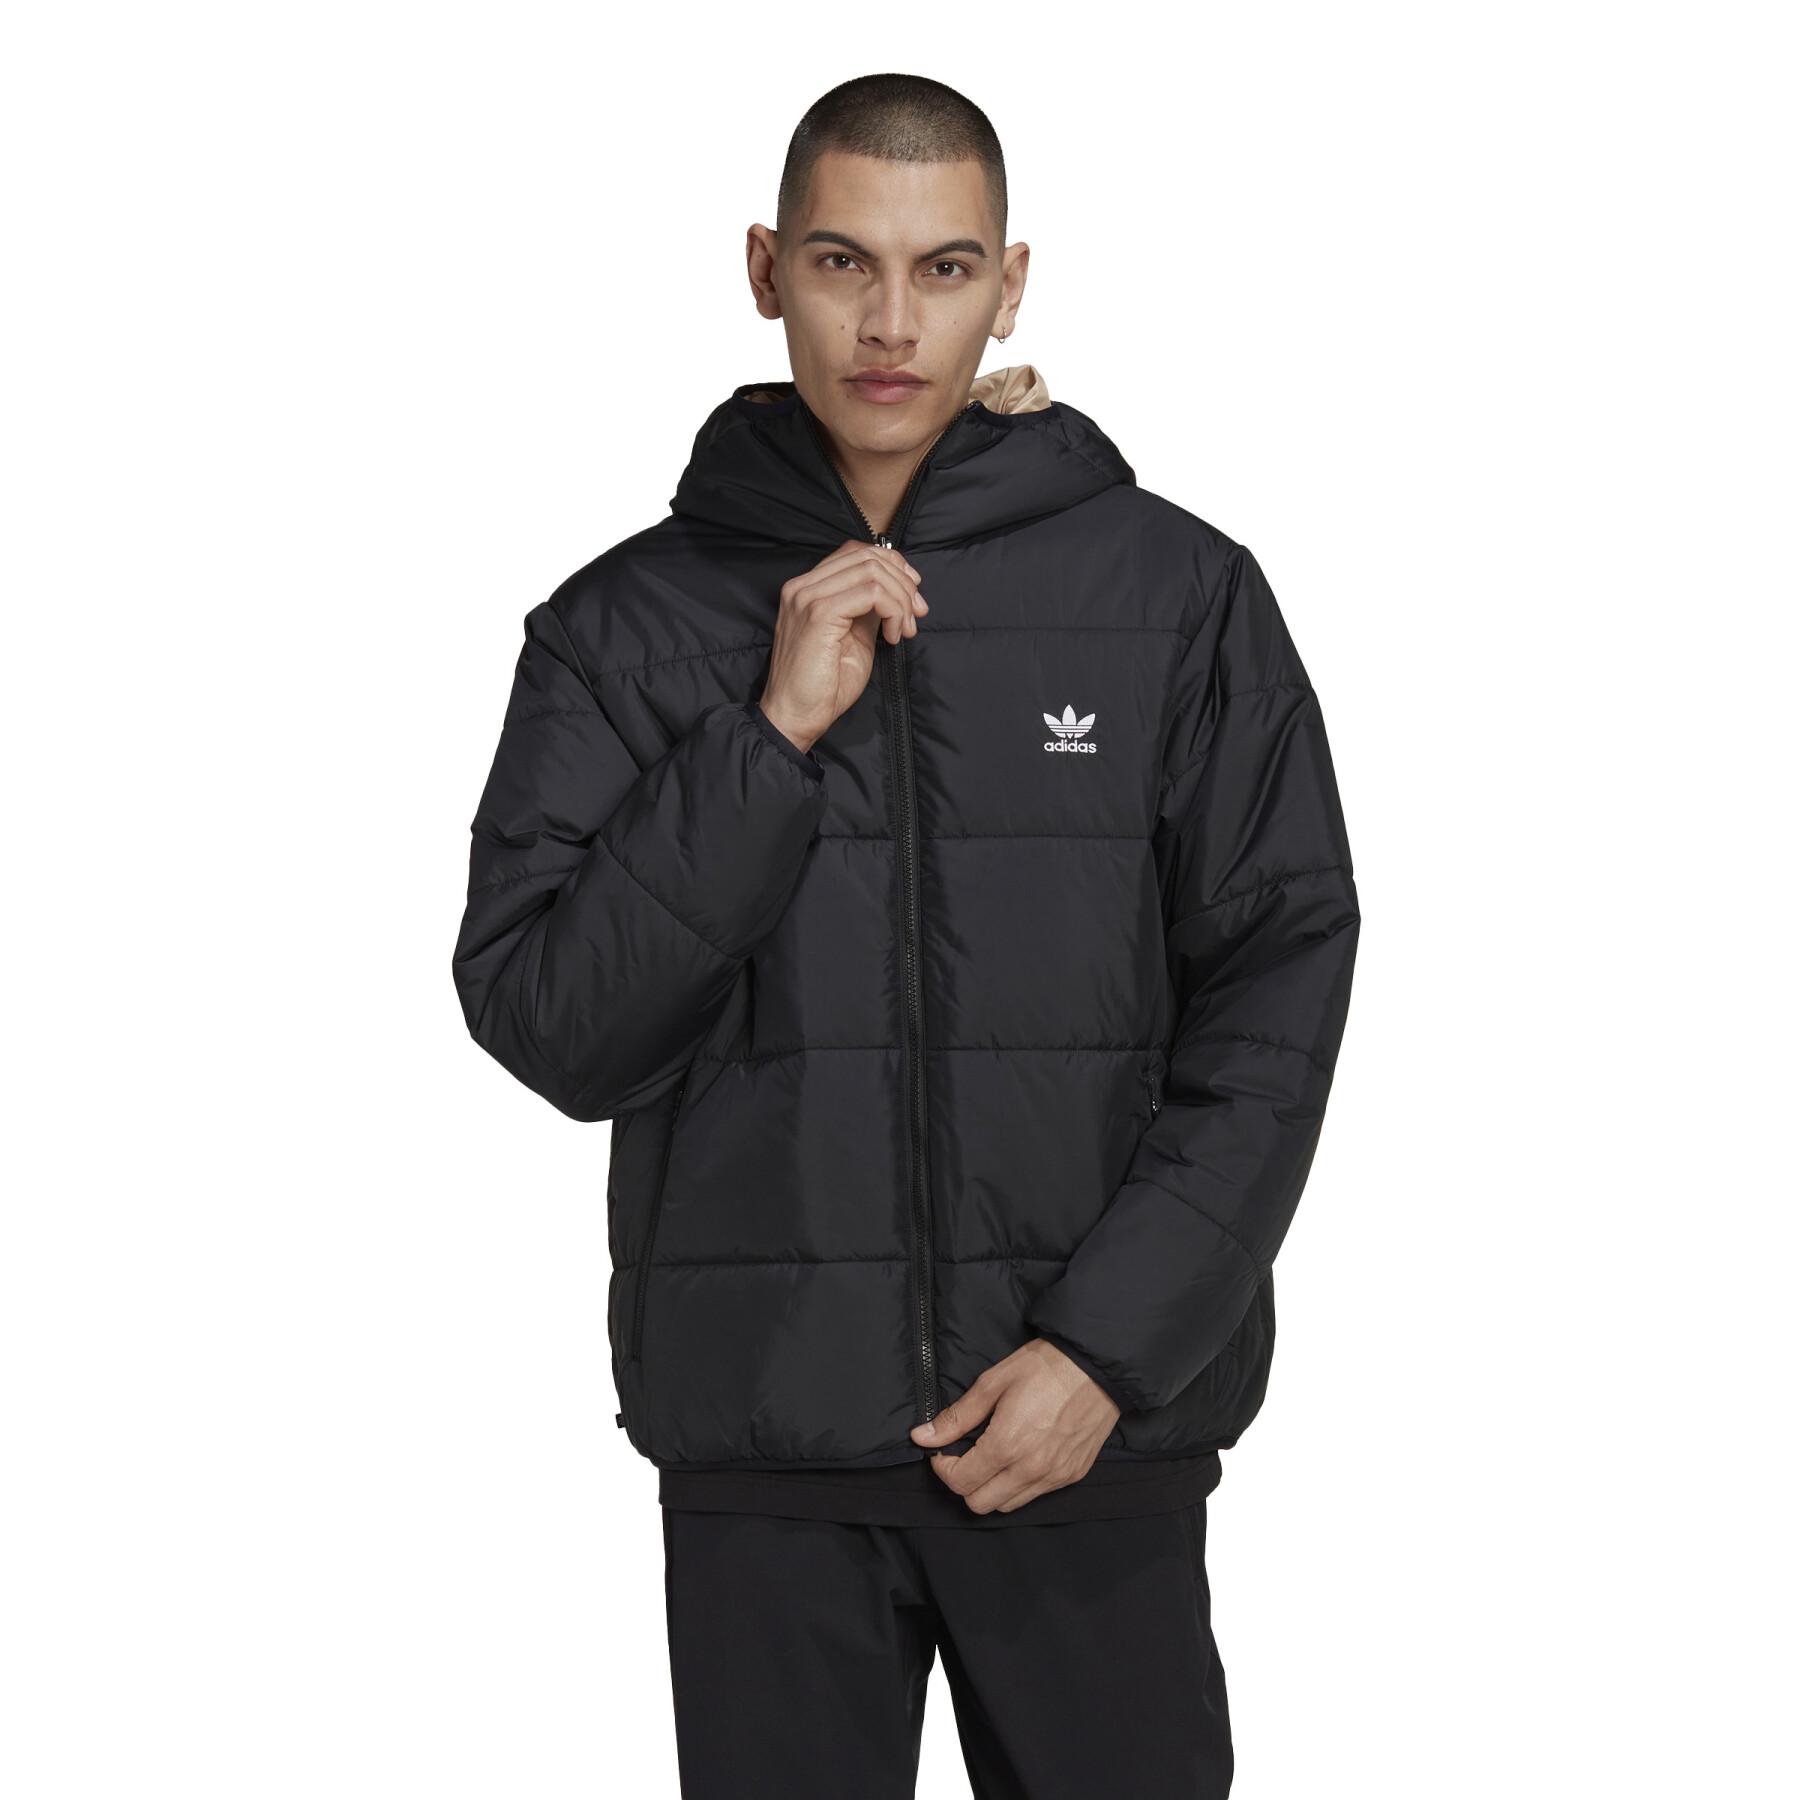 Intens Problemer Transistor Down jacket adidas Originals Reversible - Jackets - Lifestyle Male -  Lifestyle